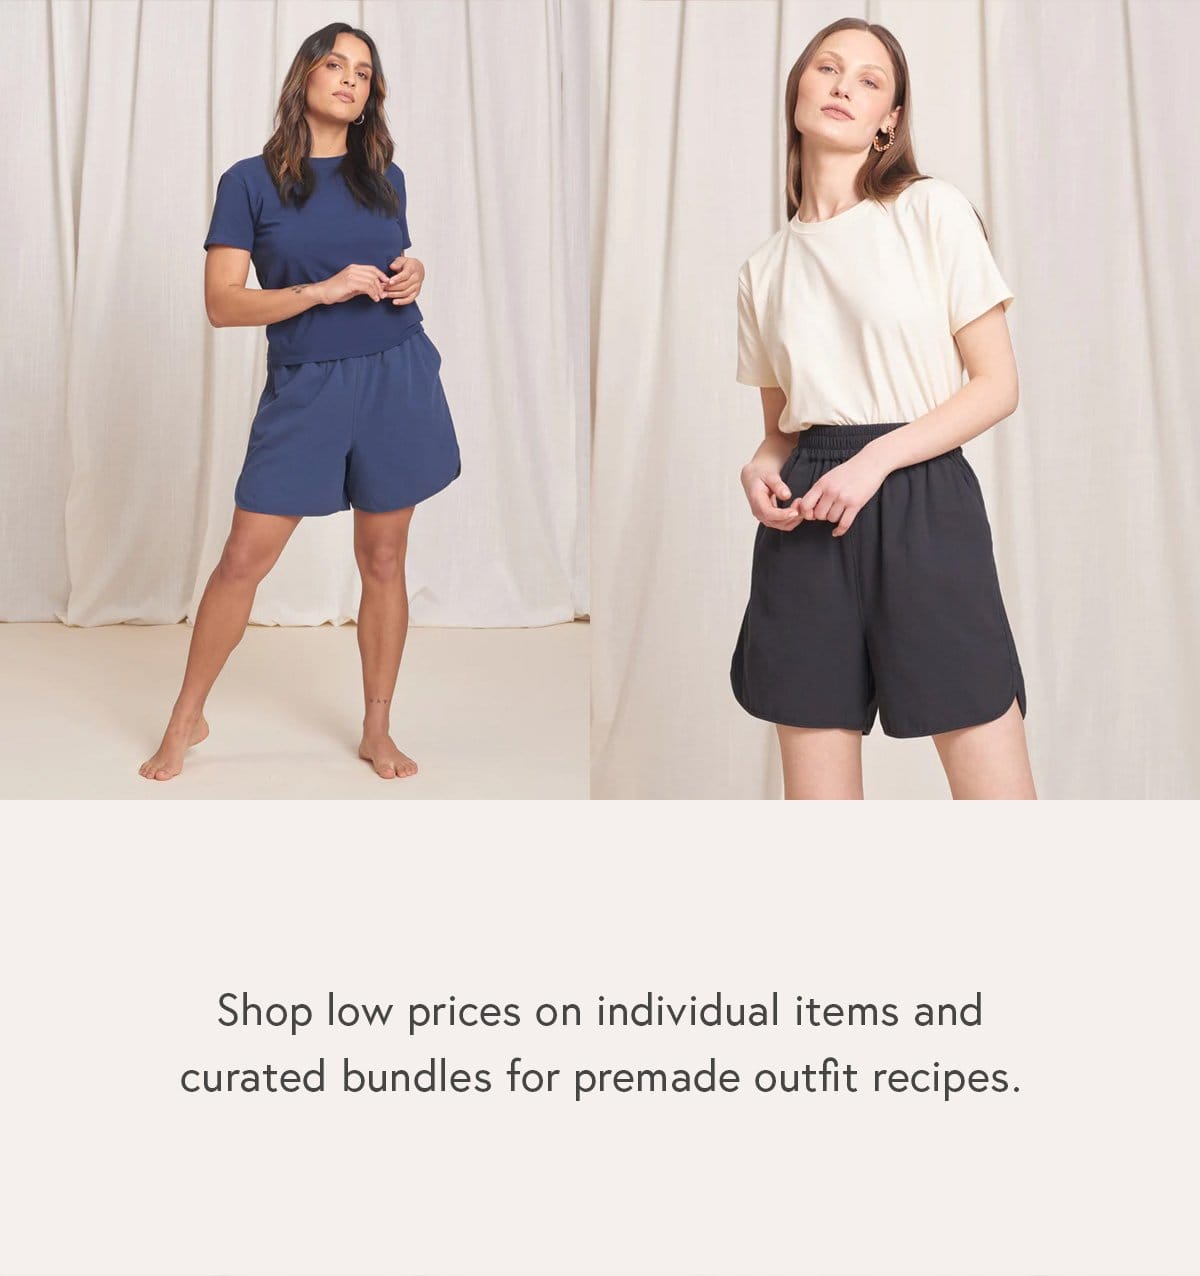 Shop low prices on individual items and curated bundles for premade outfit recipes.